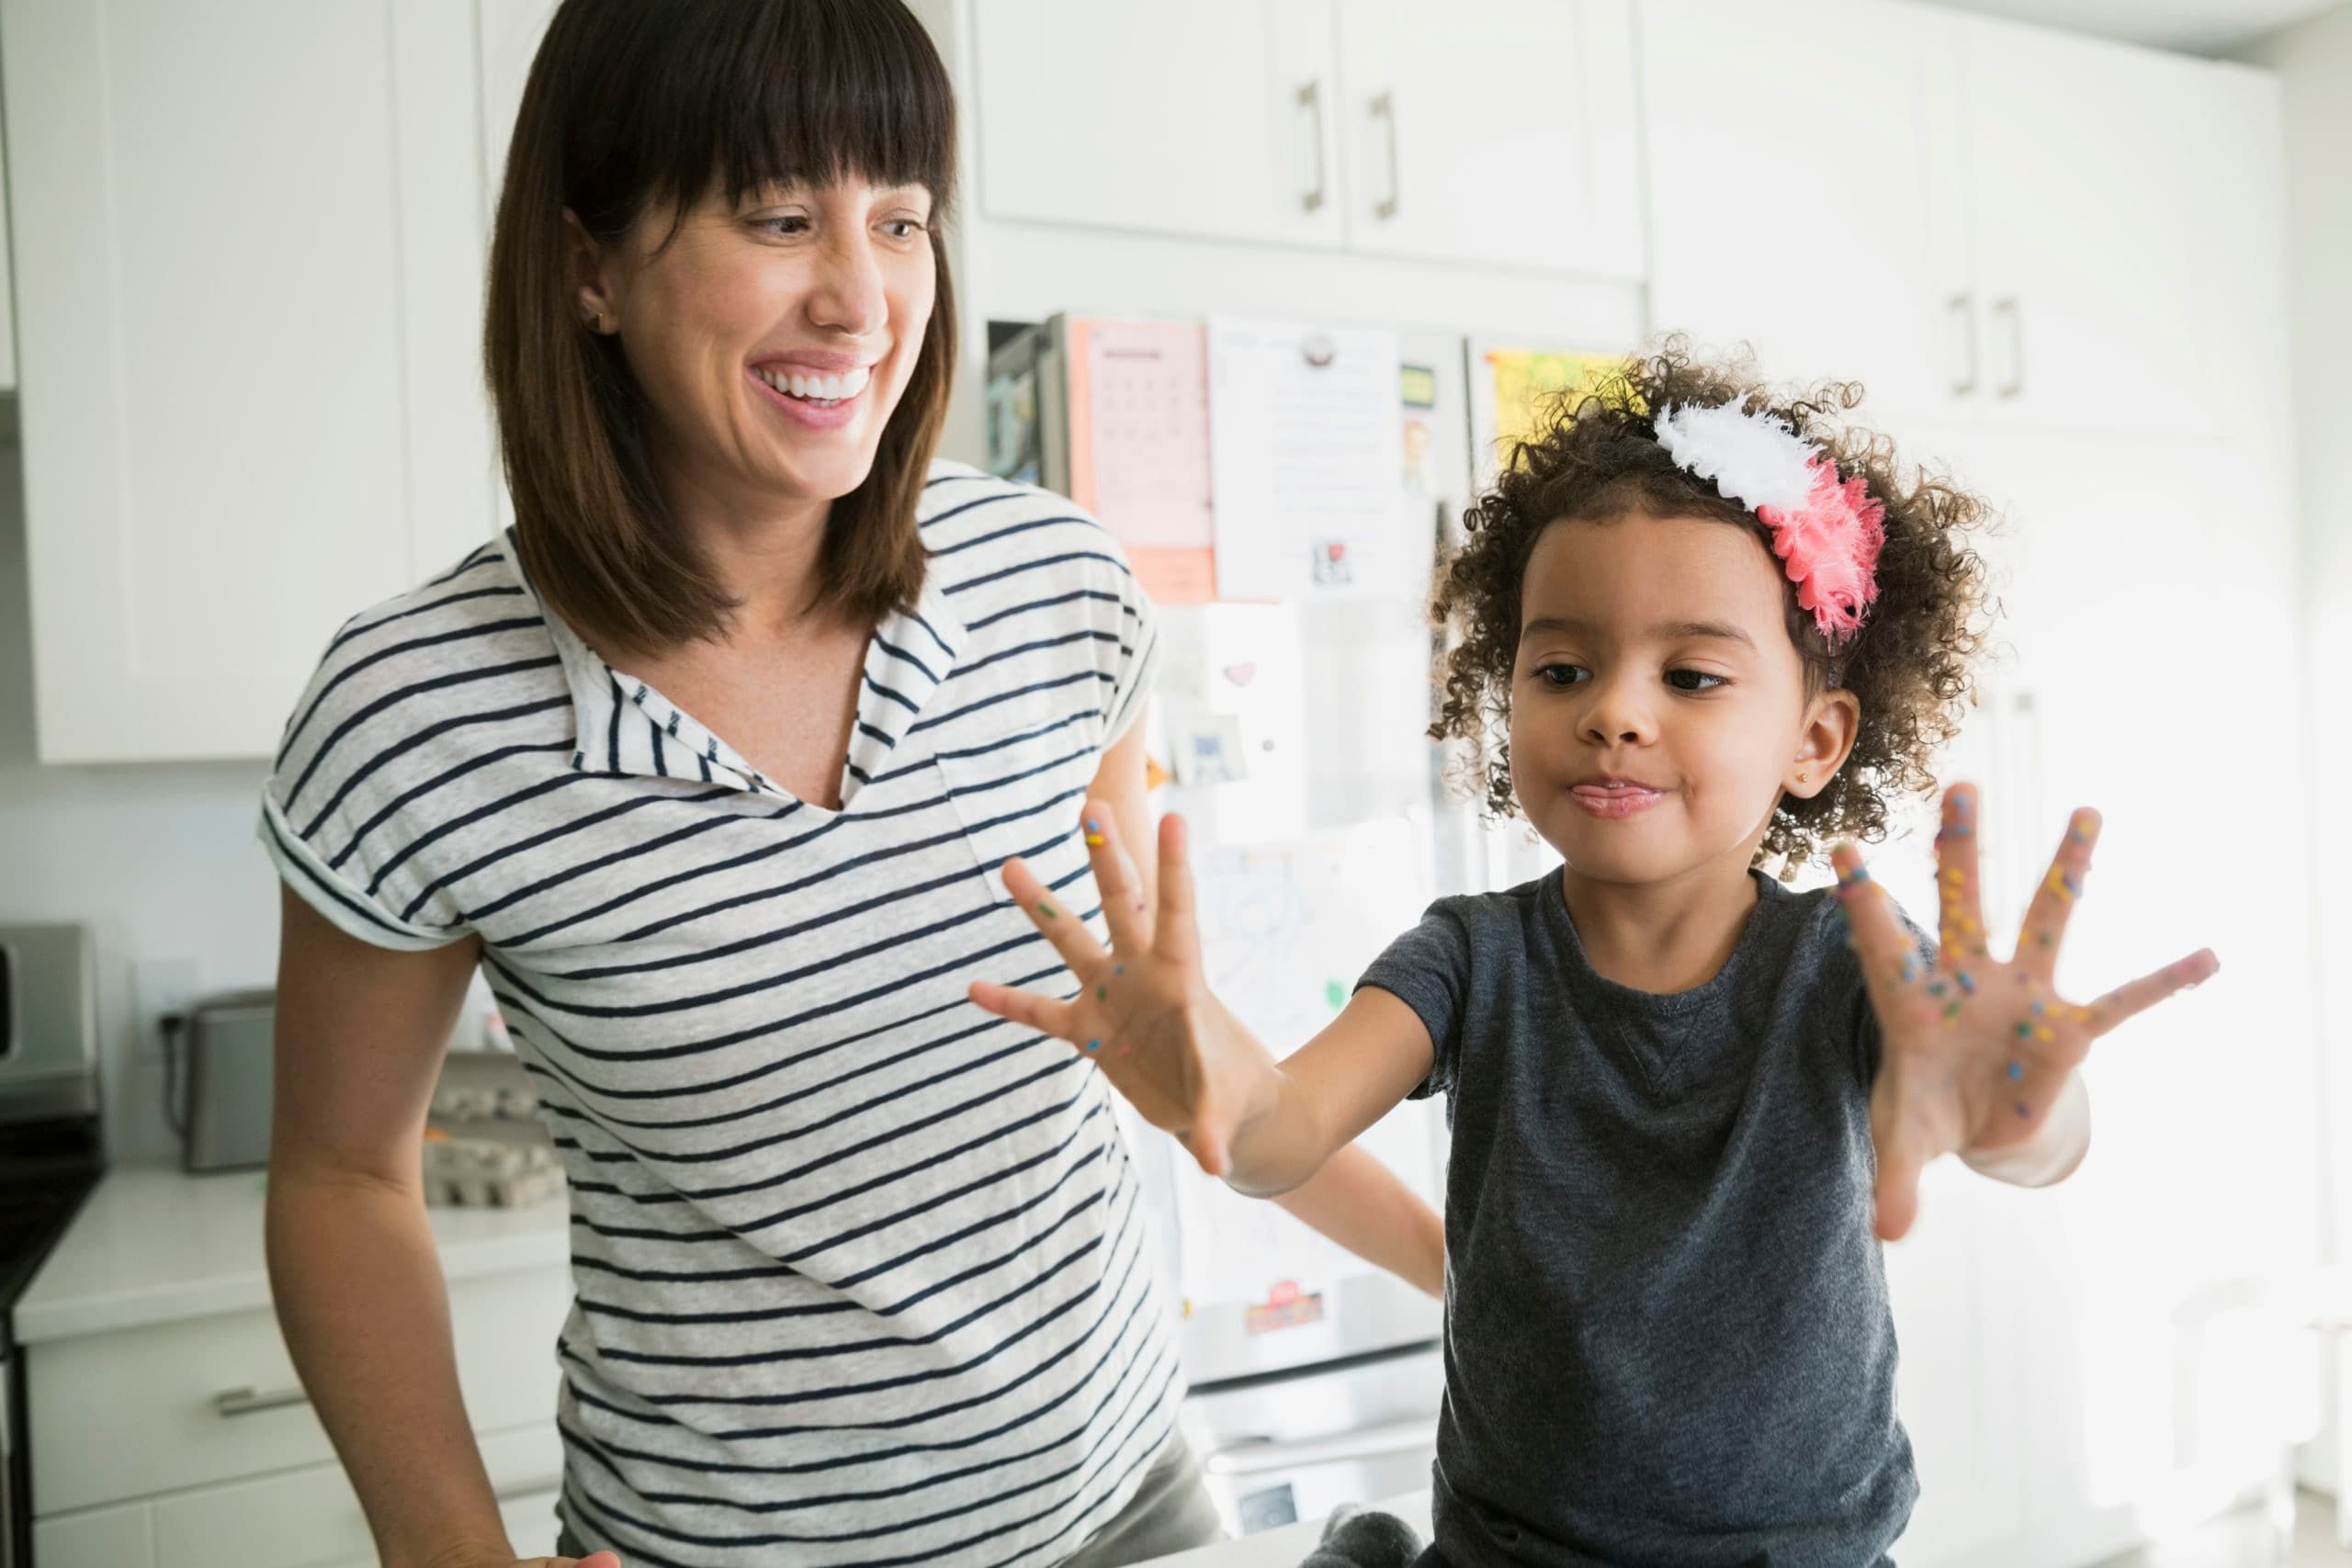 First day on the job as a nanny? Follow these 8 tips to ensure a smooth start